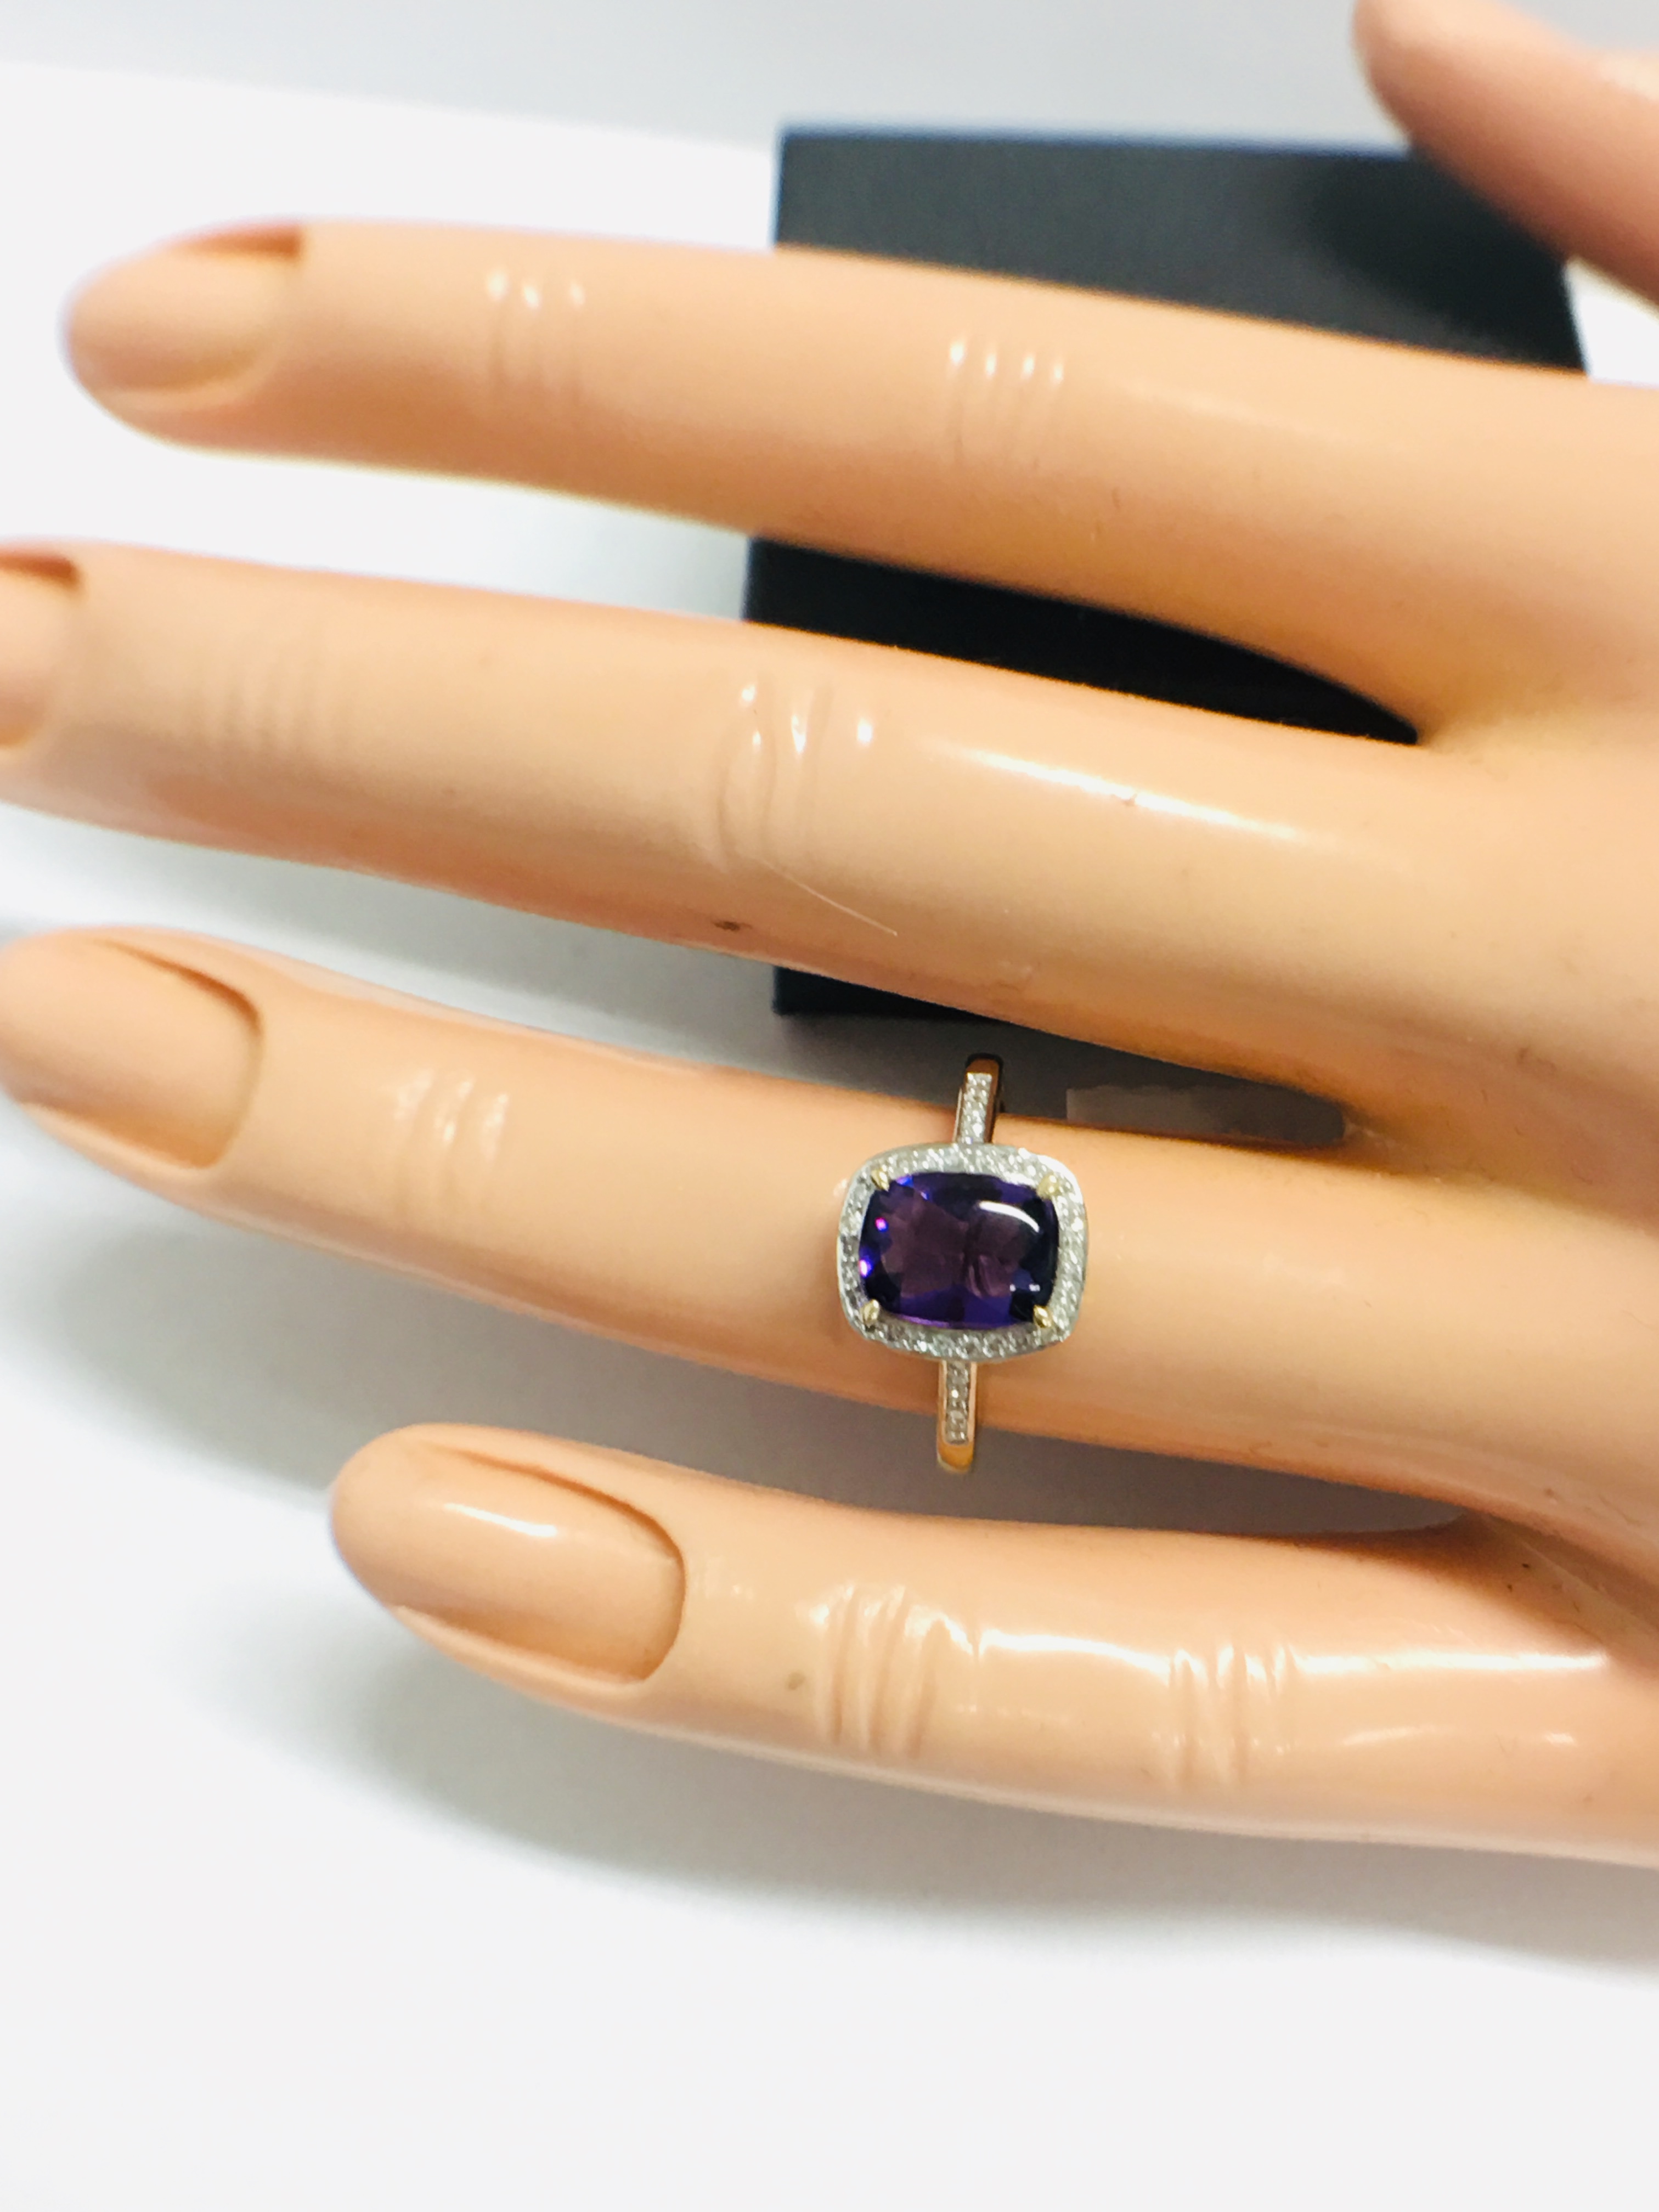 9ct yellow gold Amethyst and diamond ring - Image 11 of 11